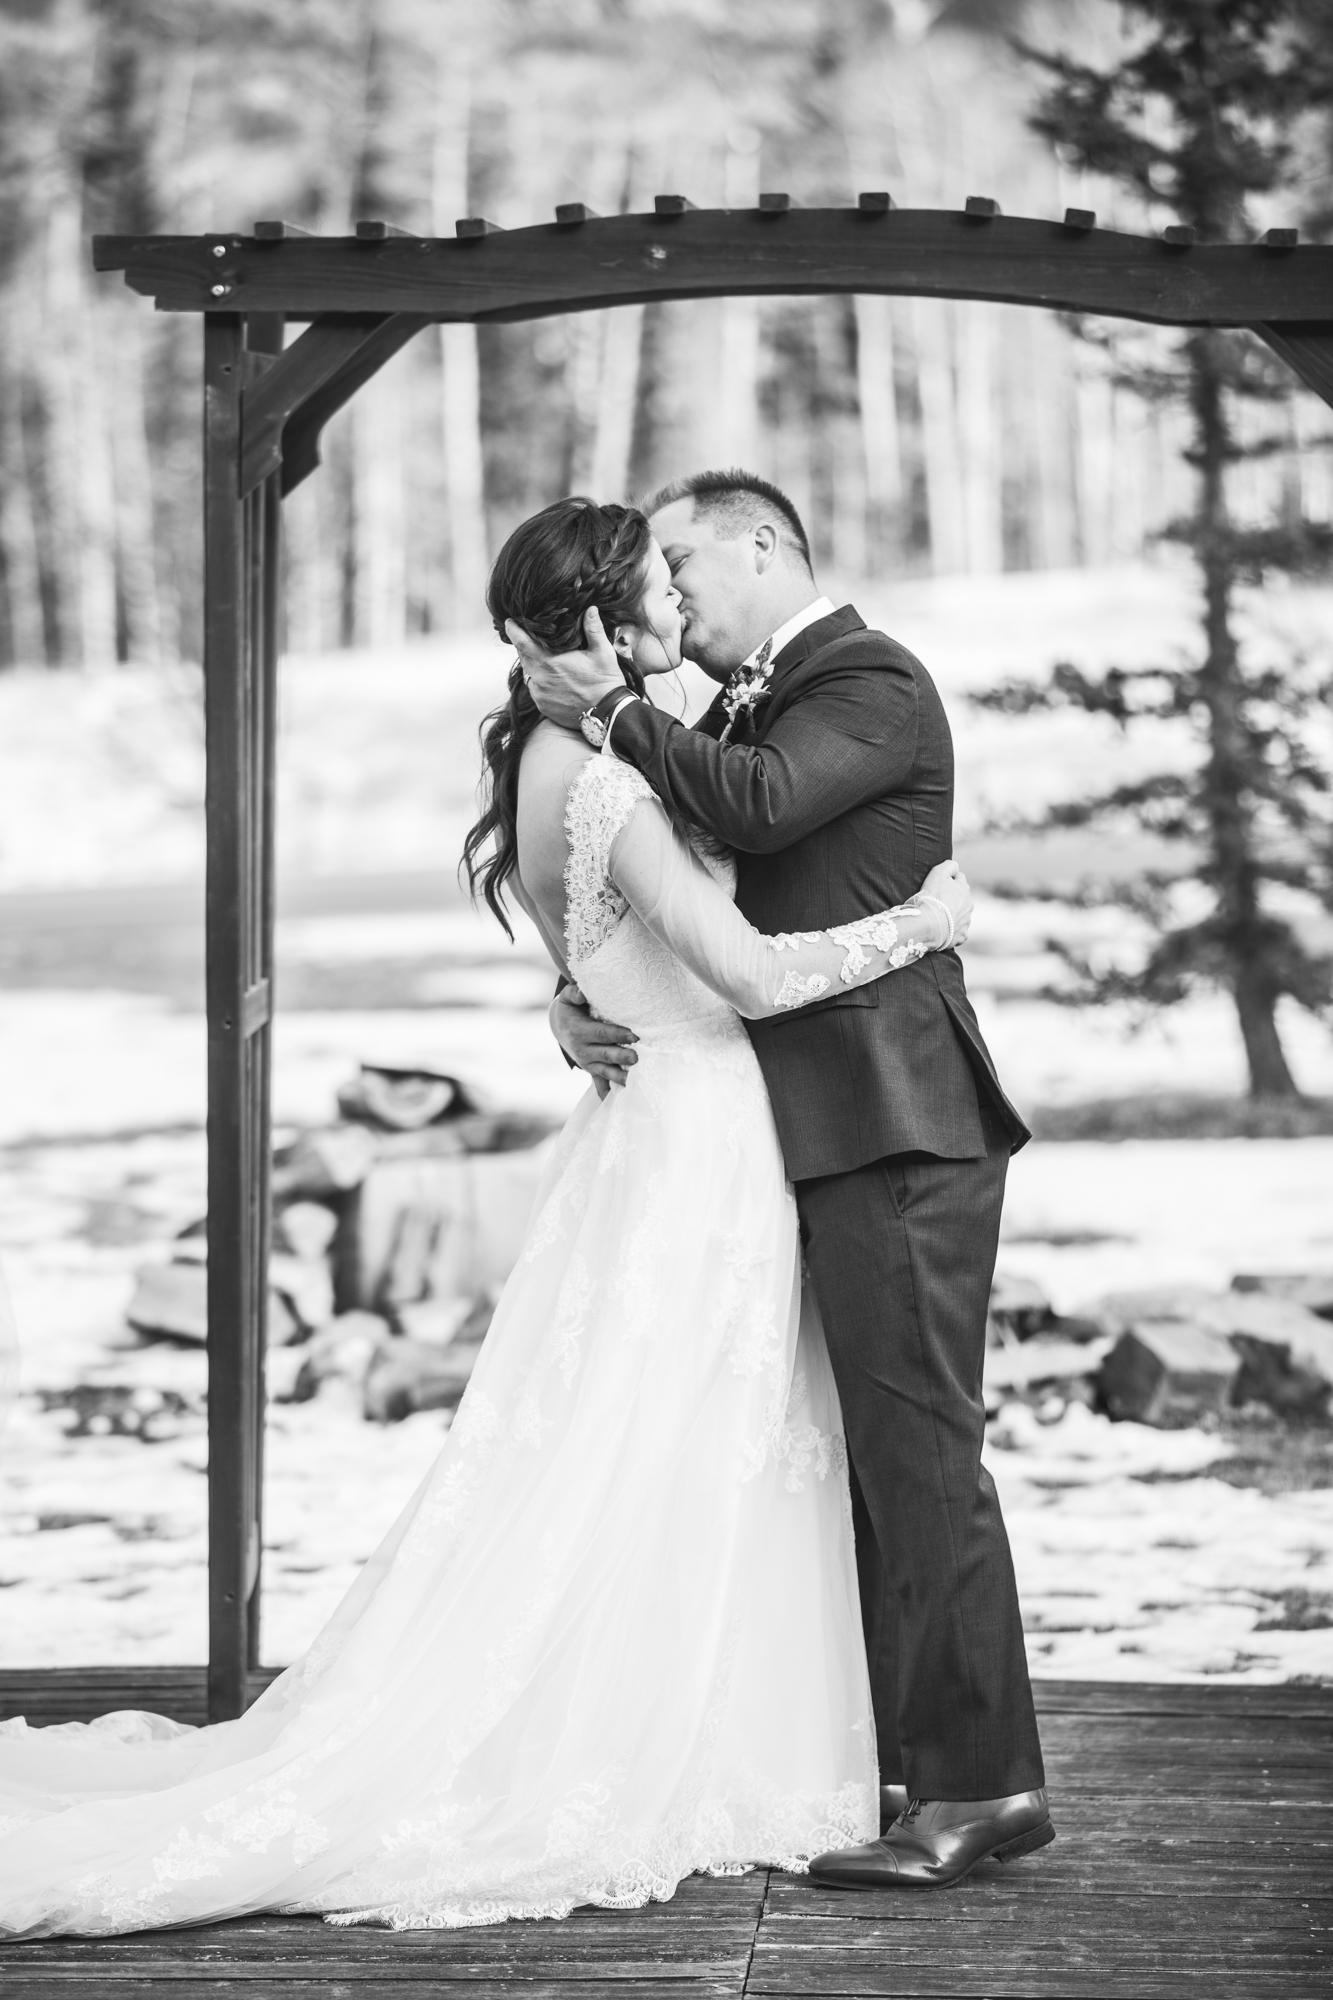 Durango, Colorado Winter Wedding ceremony first kiss as husband and wife, winter bride and groom